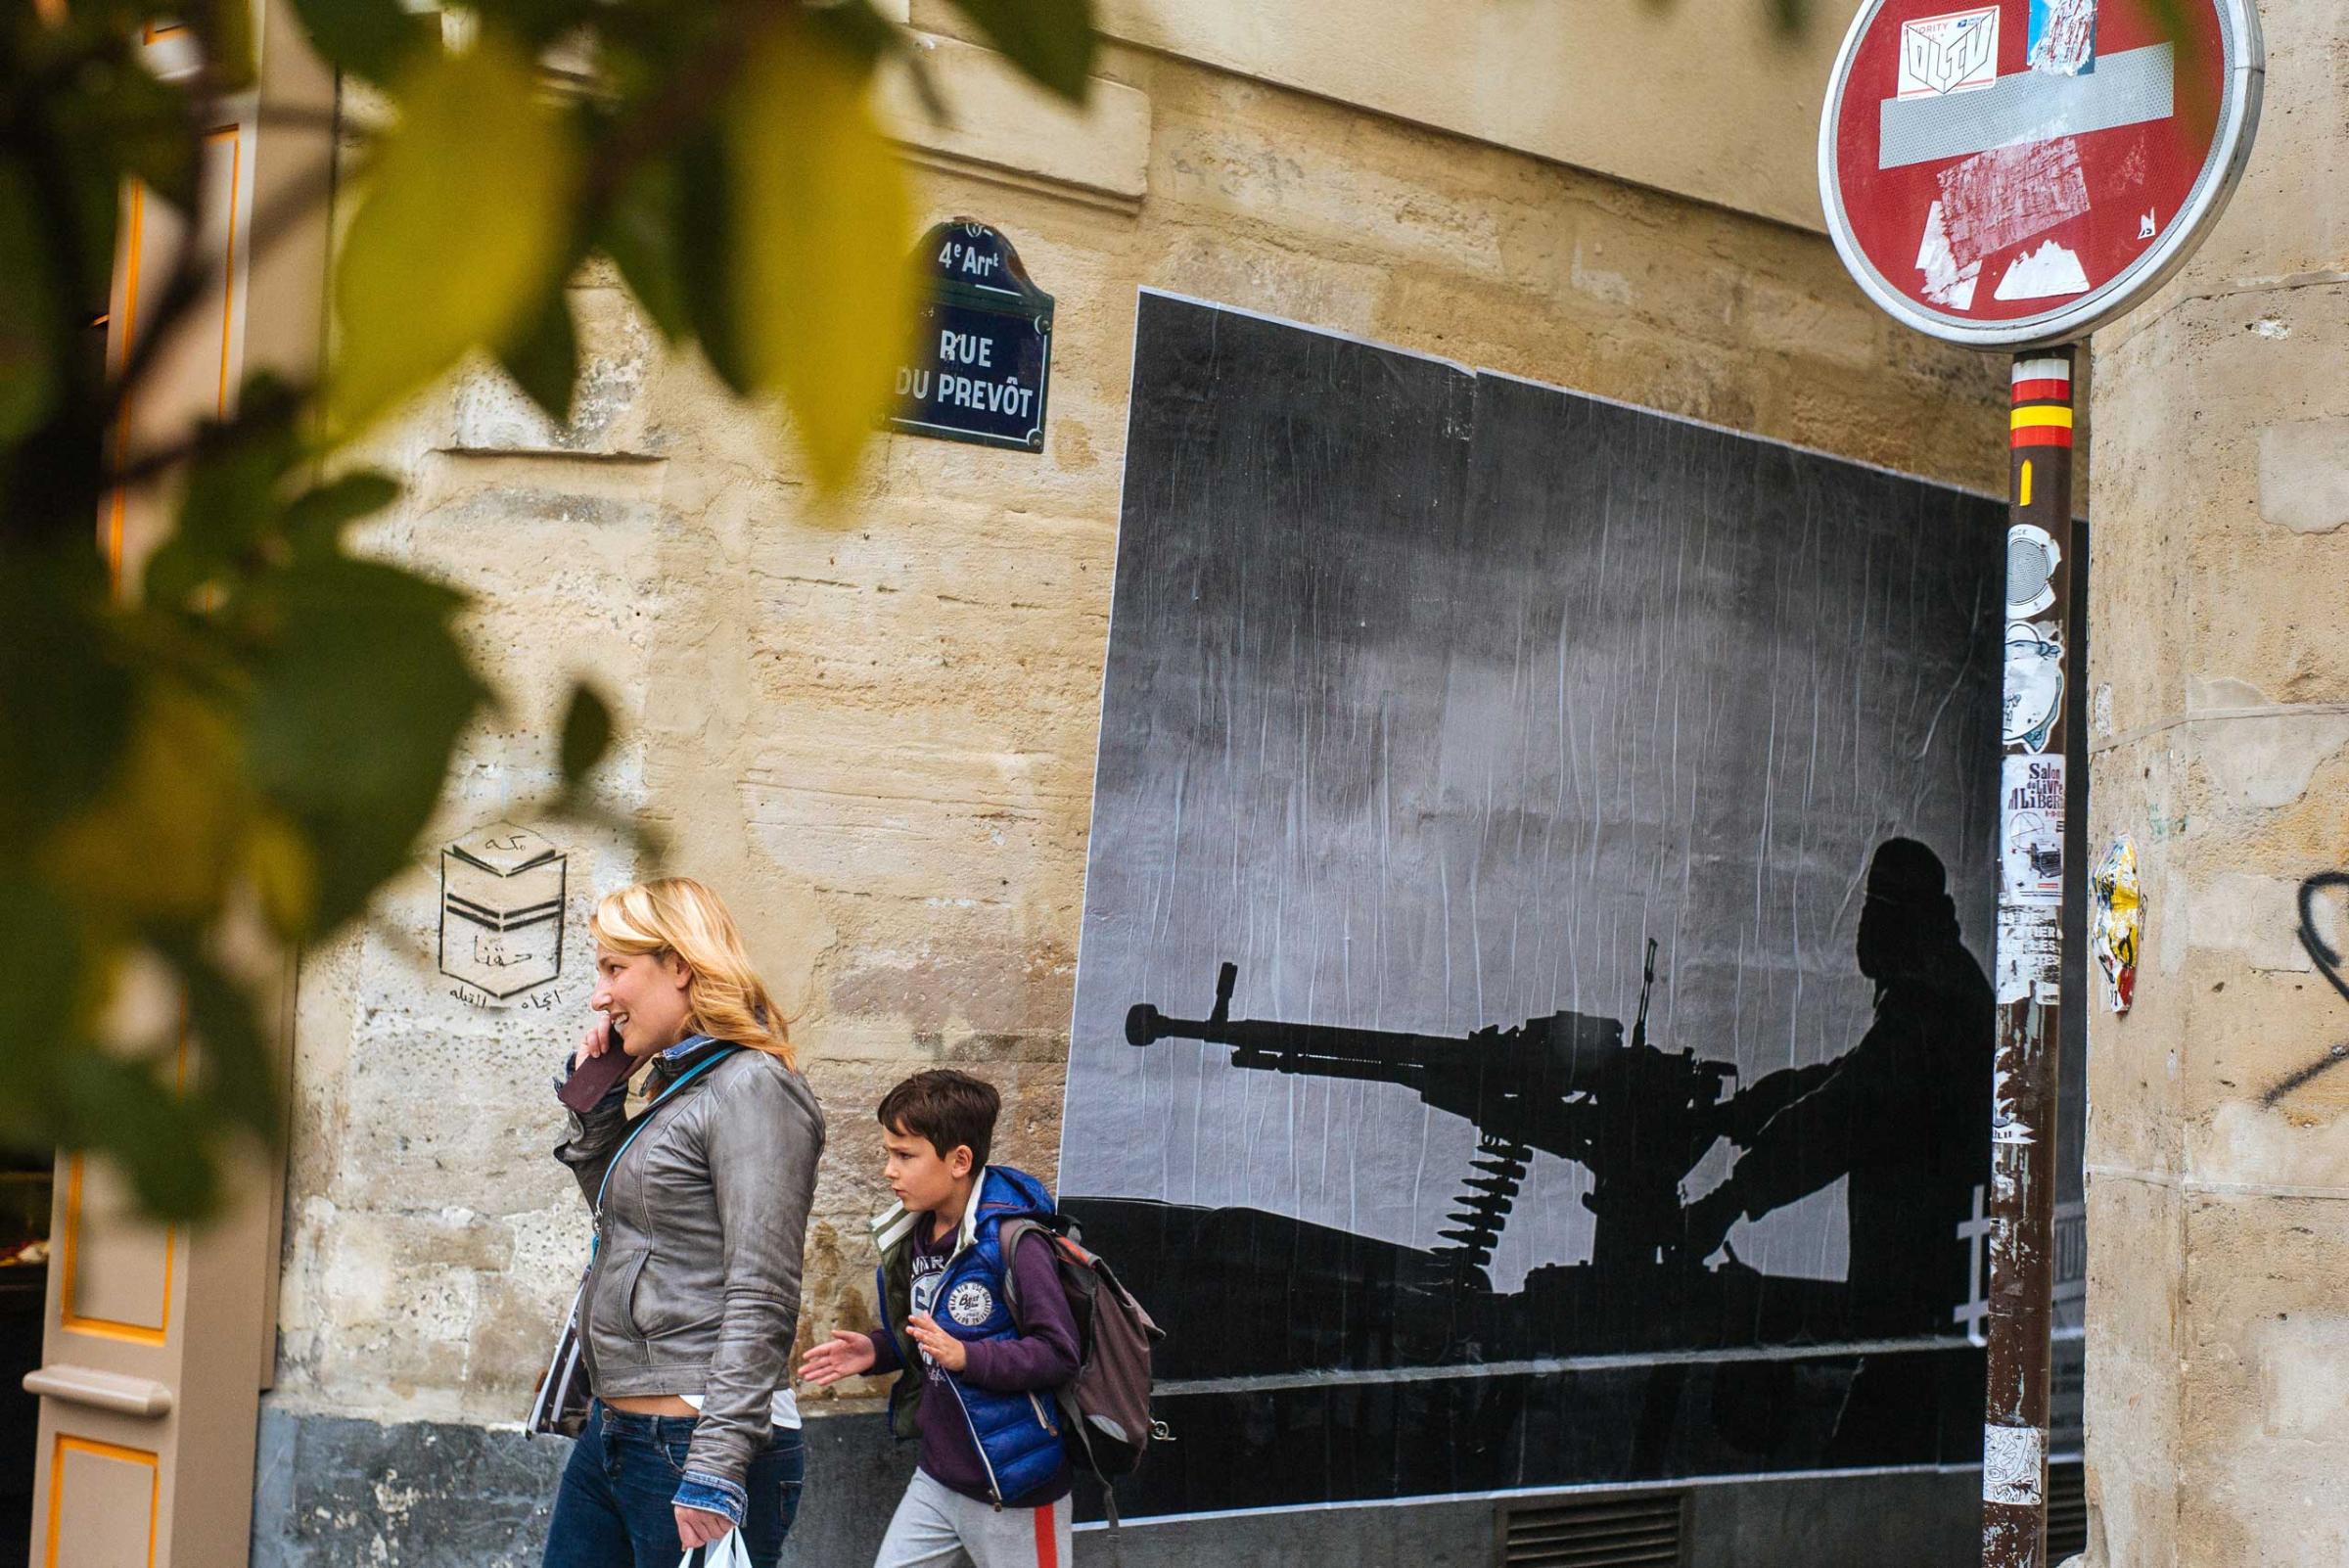 A woman and a child walk in front of one of Thibaut Camus' photographs on Rue du Prevot, Paris.